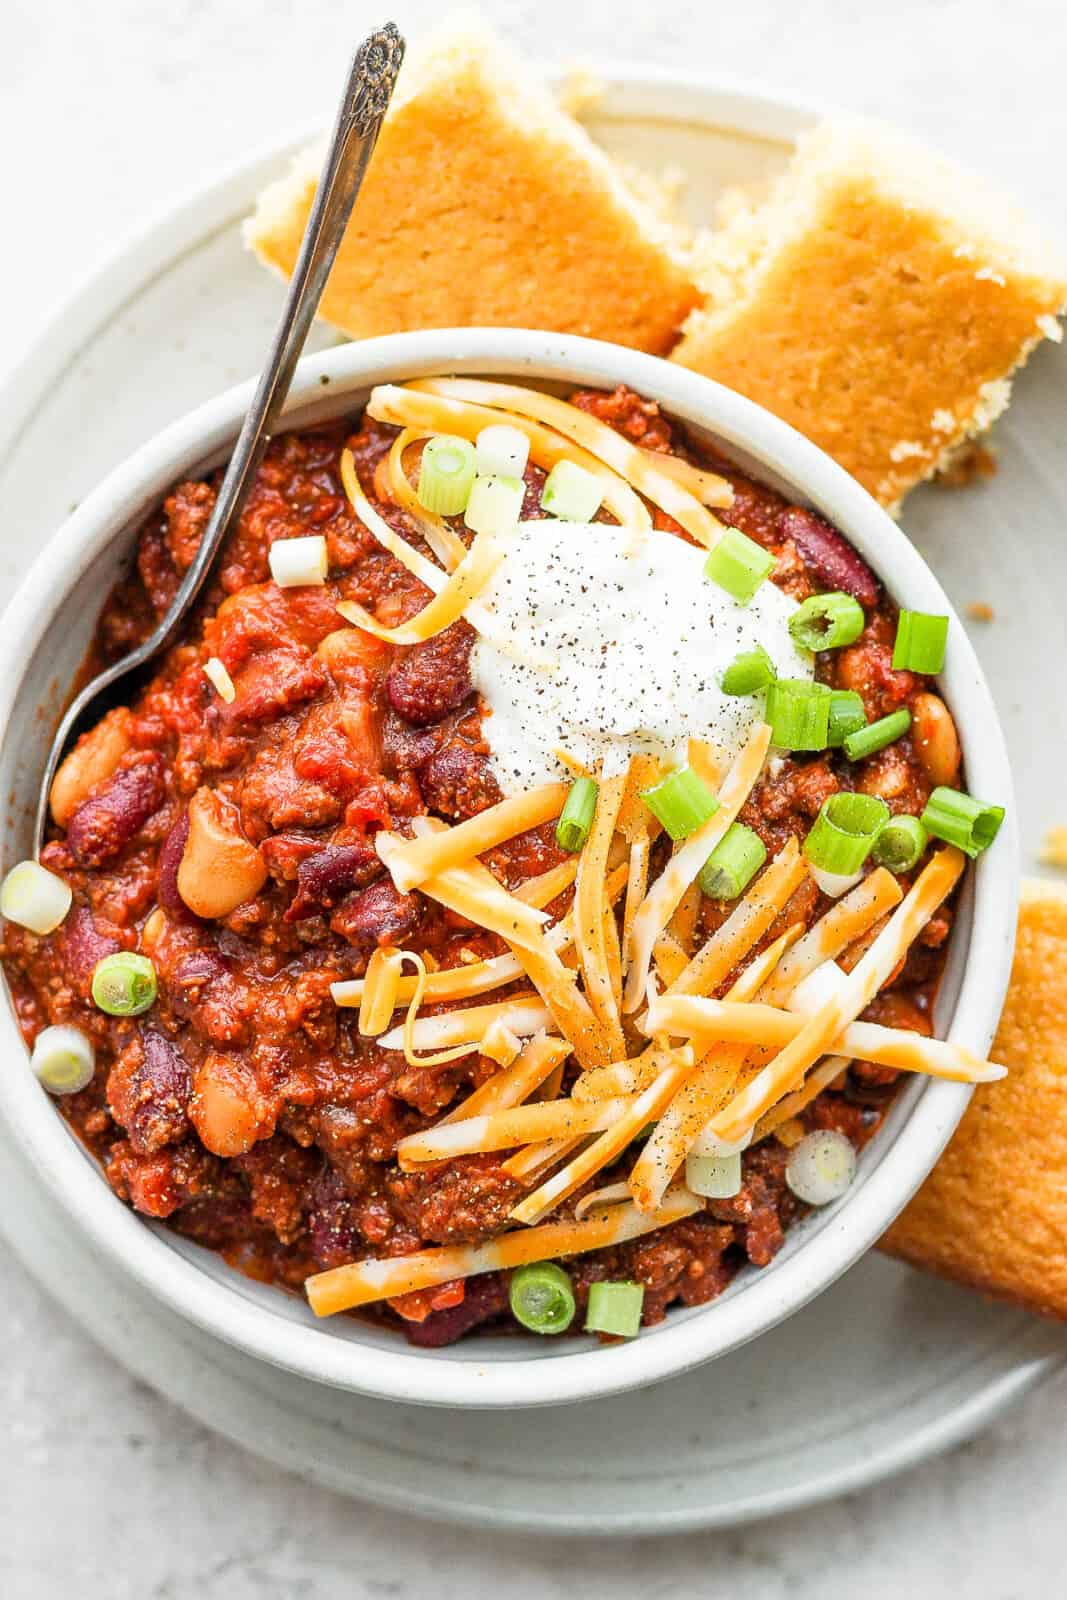 A bowl of slow cooker chili with toppings and cornbread on the side.